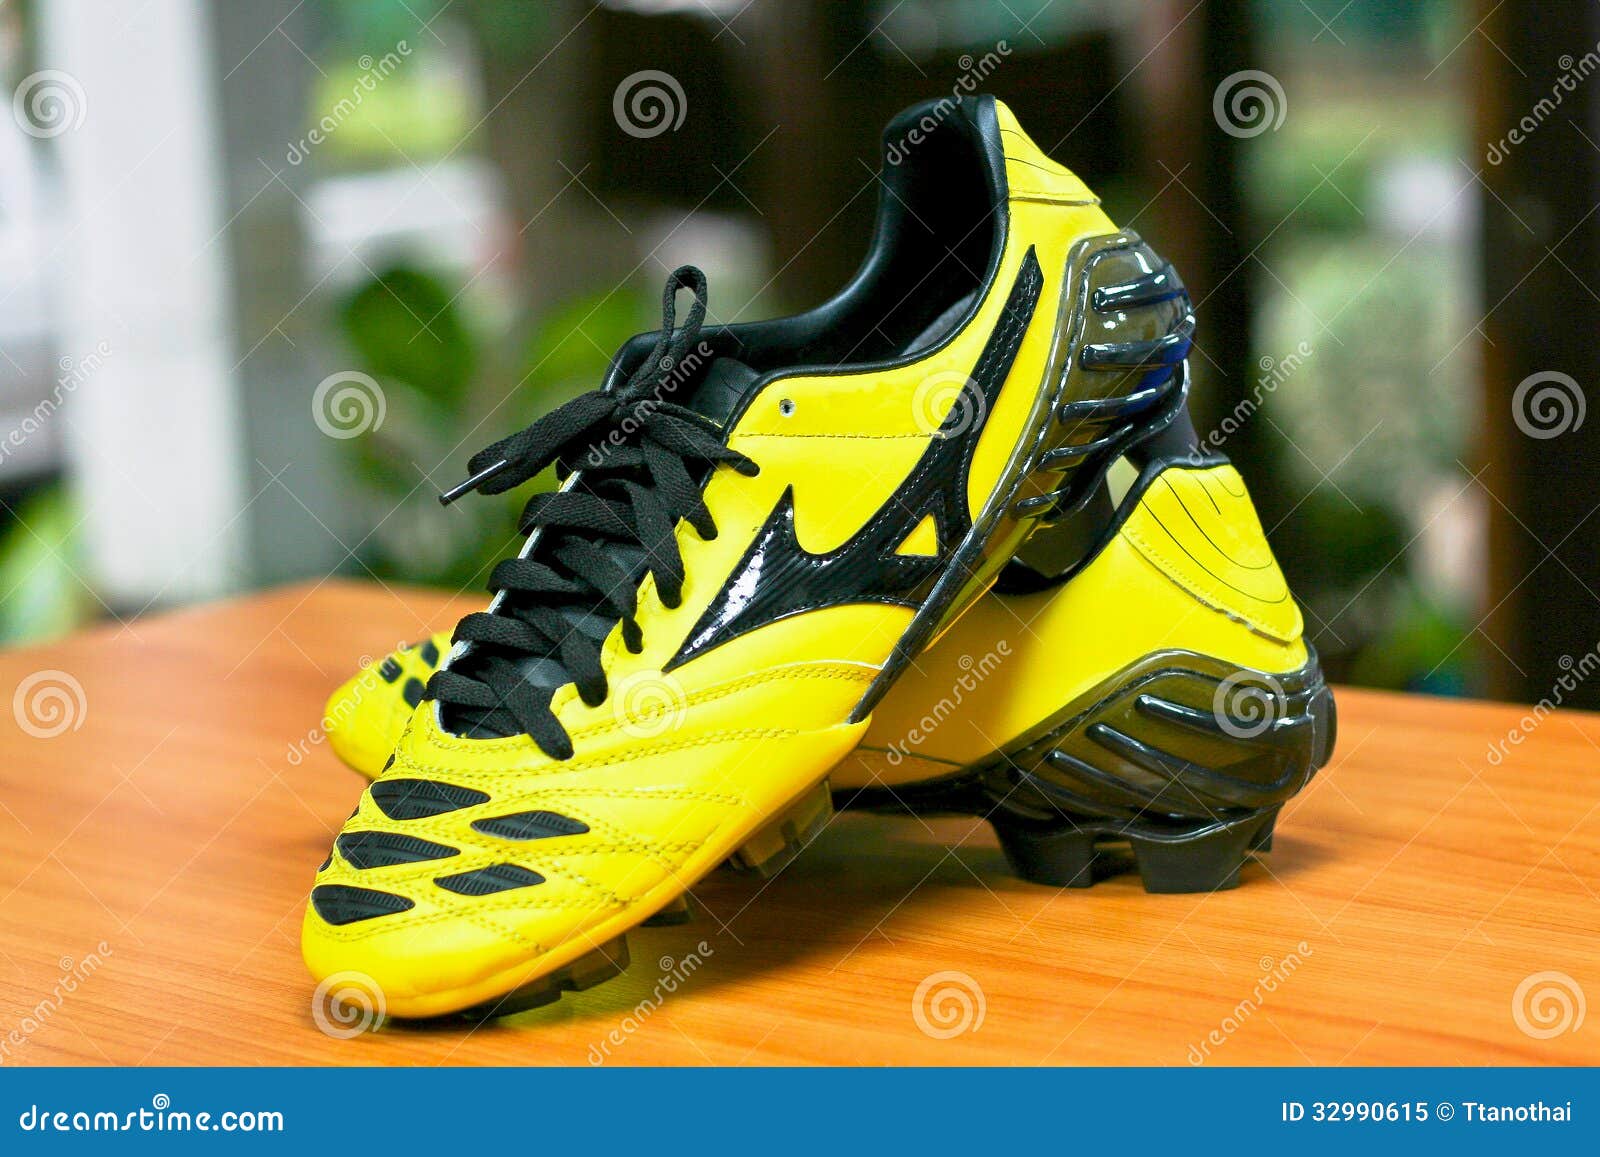 football shoes different color